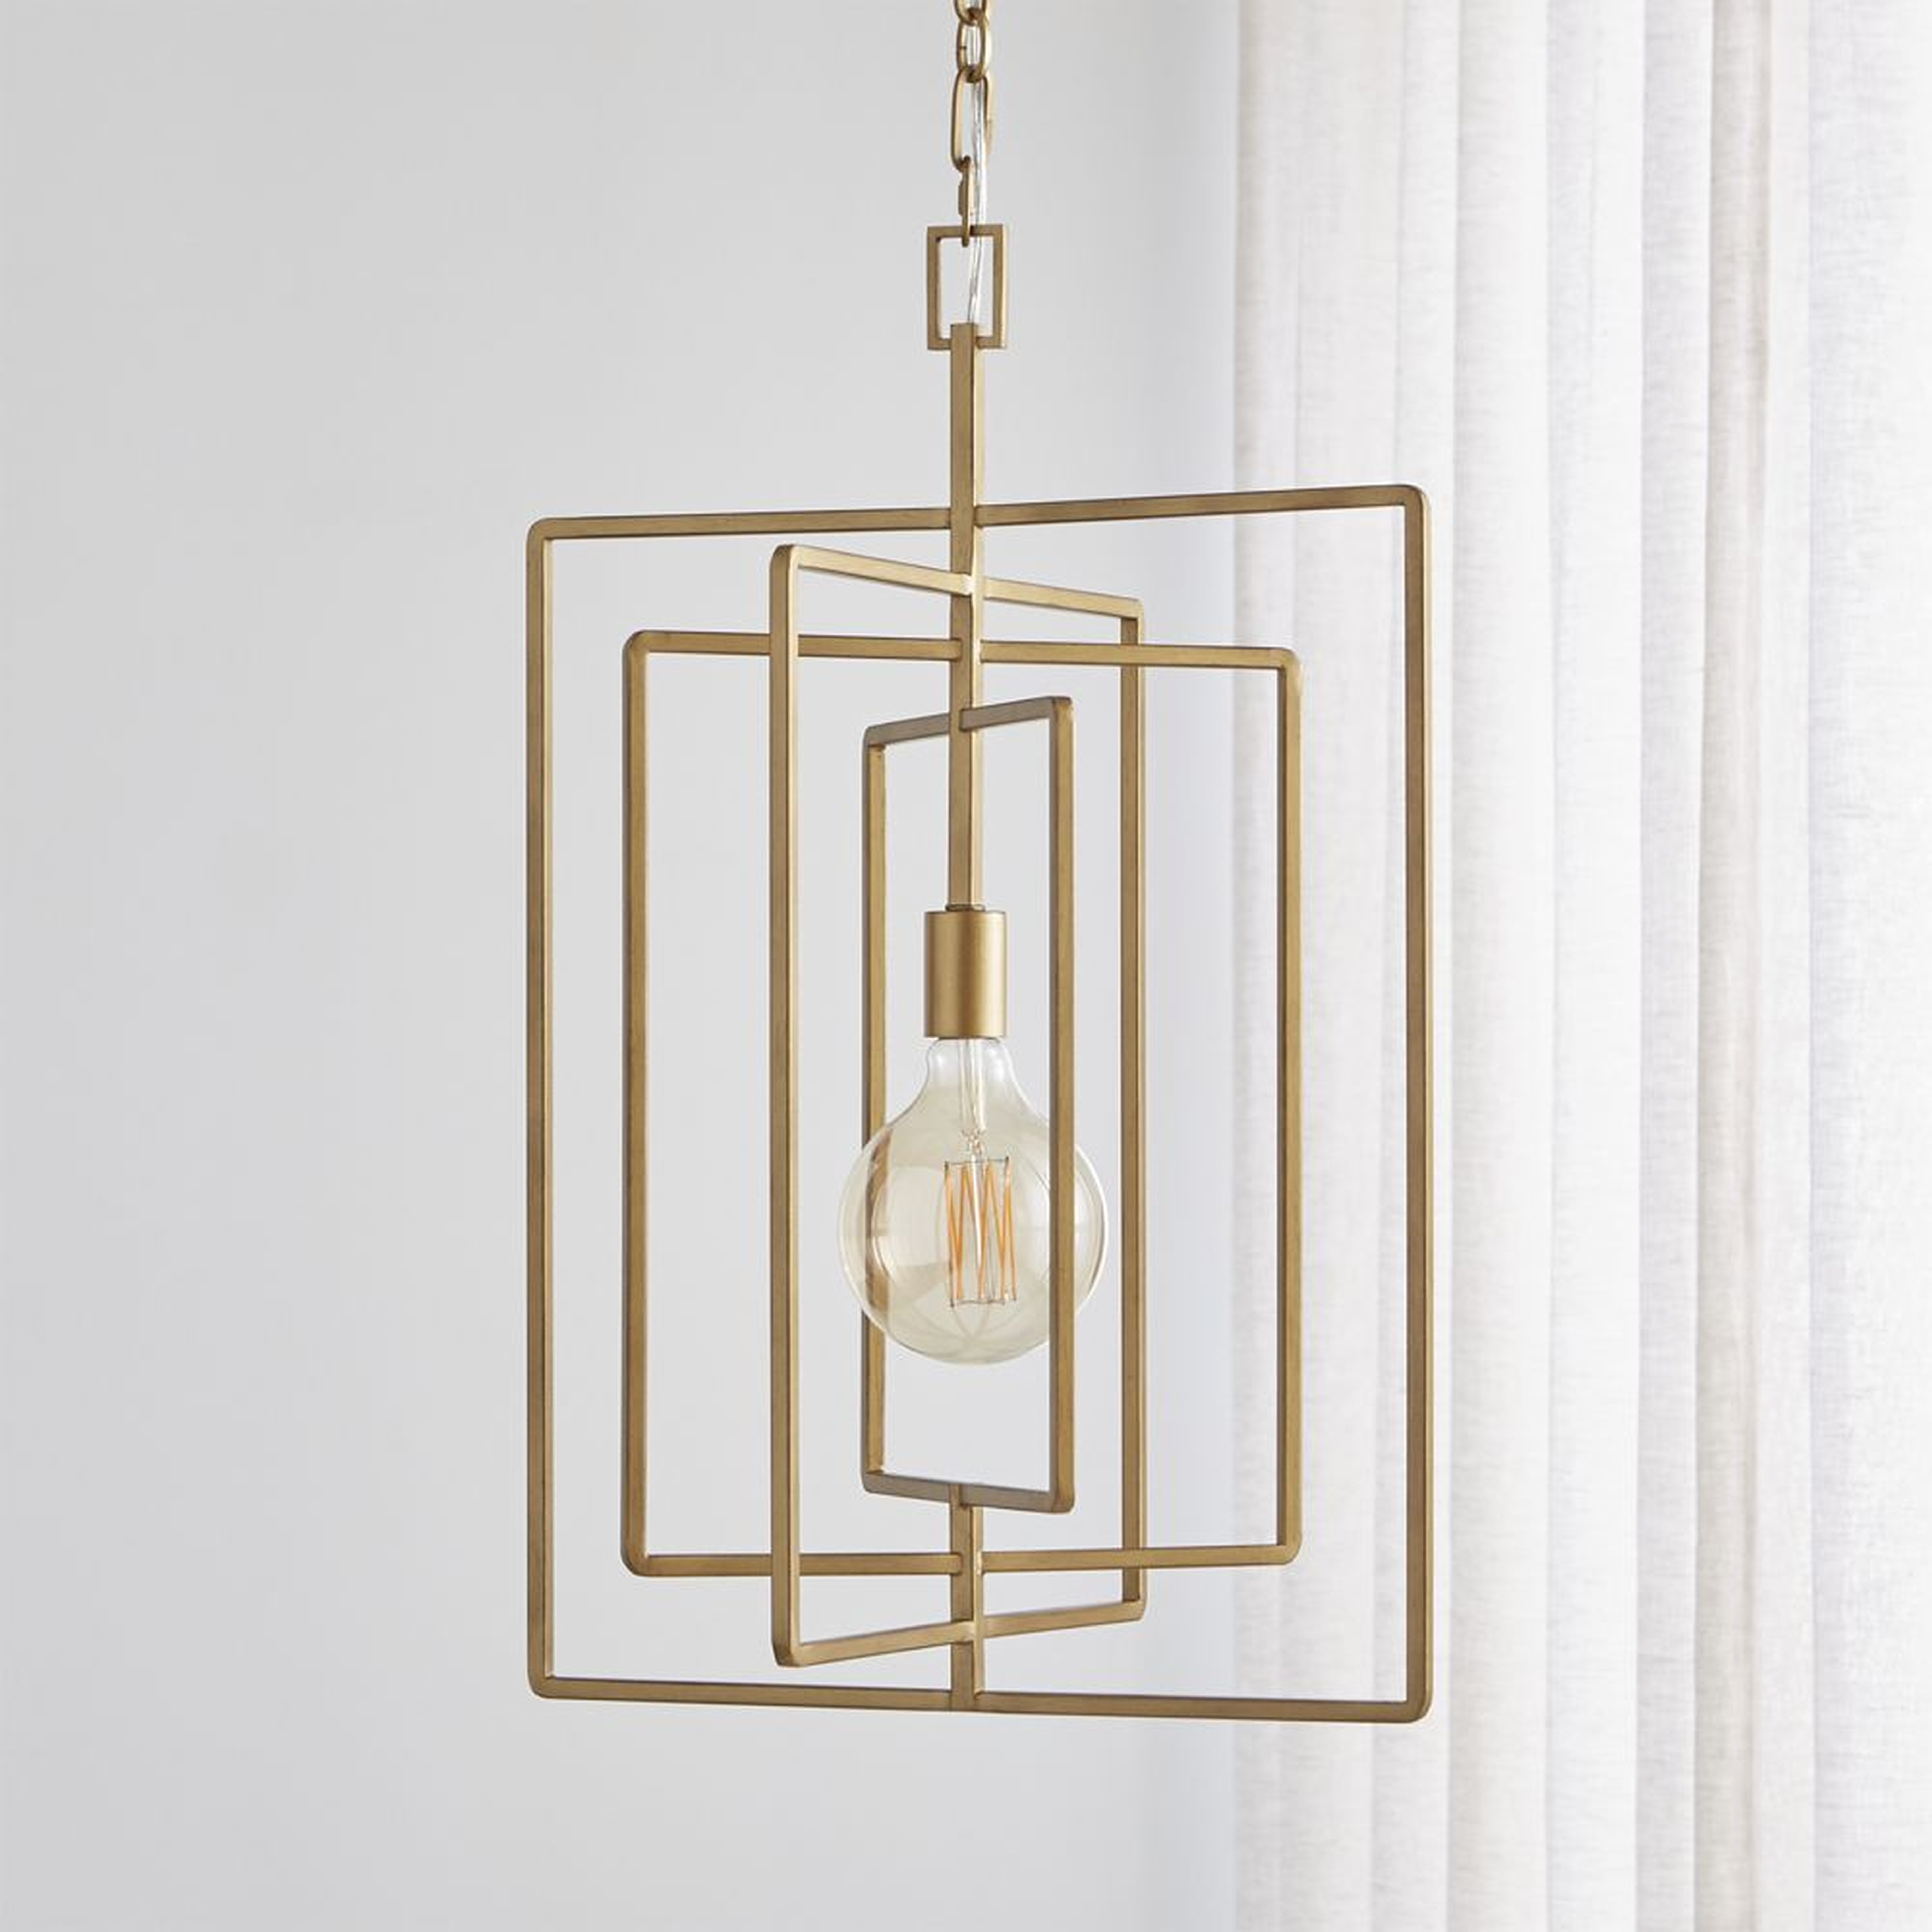 Pivot Brass Caged Pendant Light - Crate and Barrel